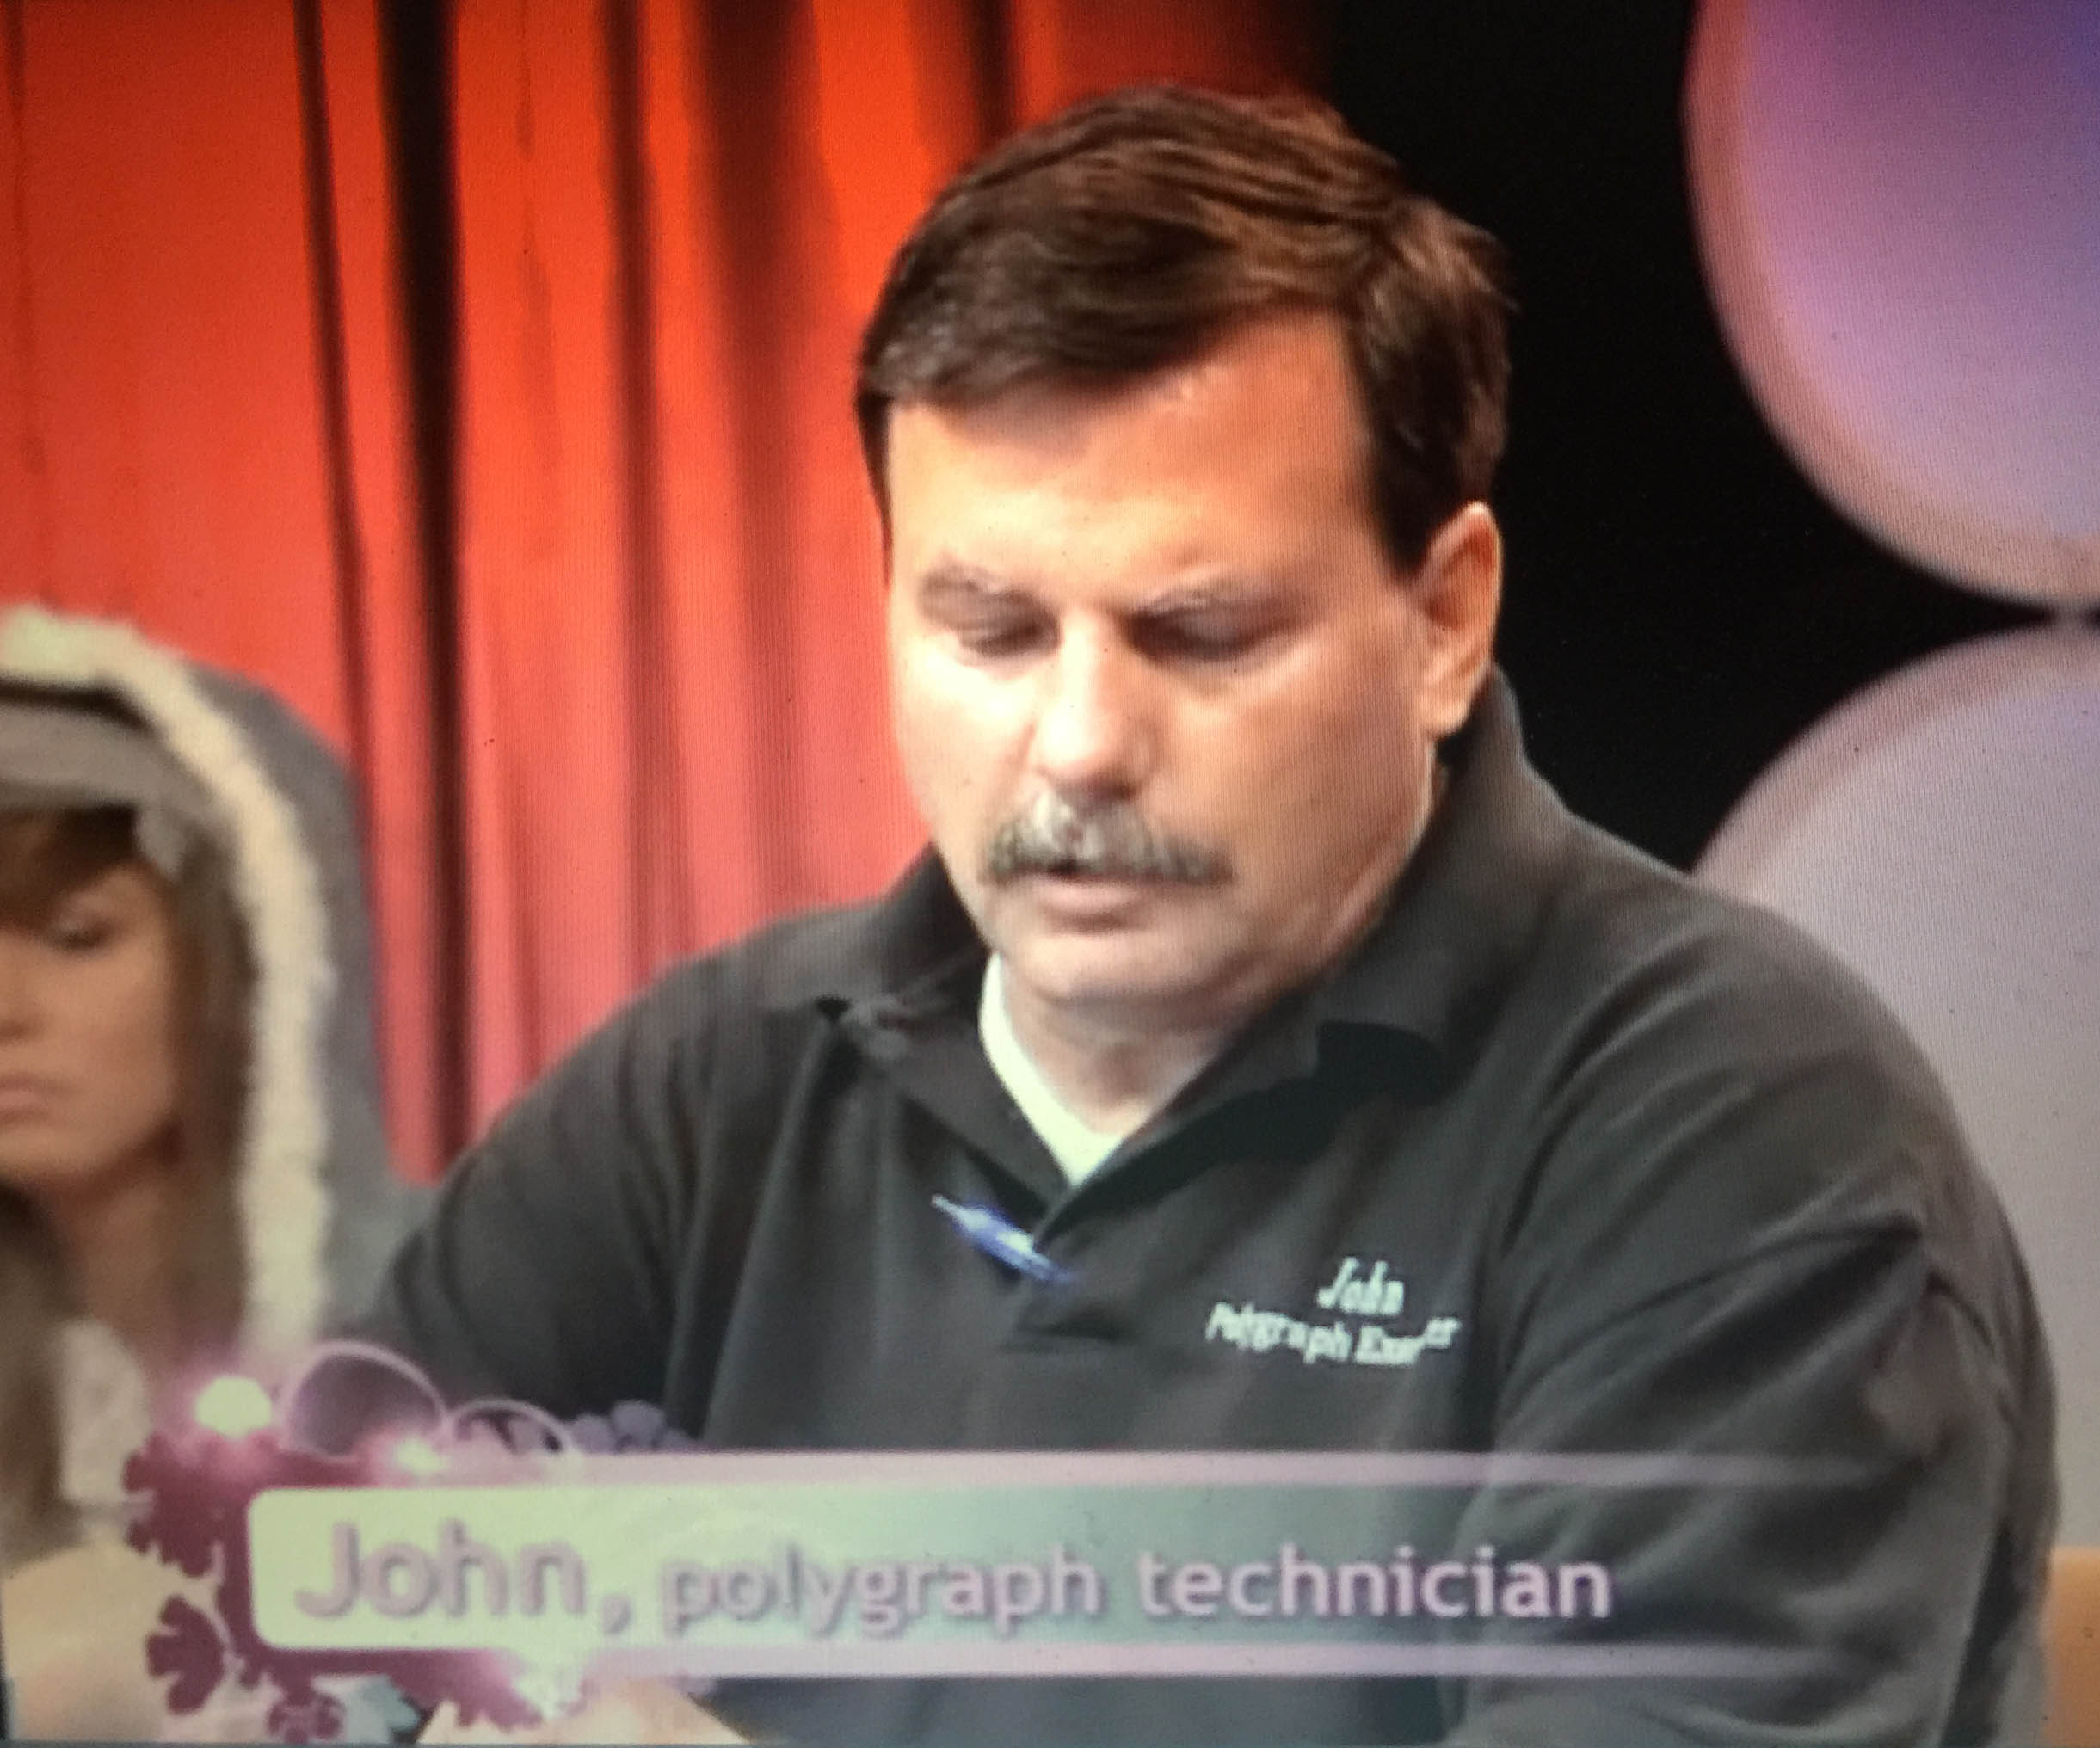 learn polygraph from working polygraph examiners